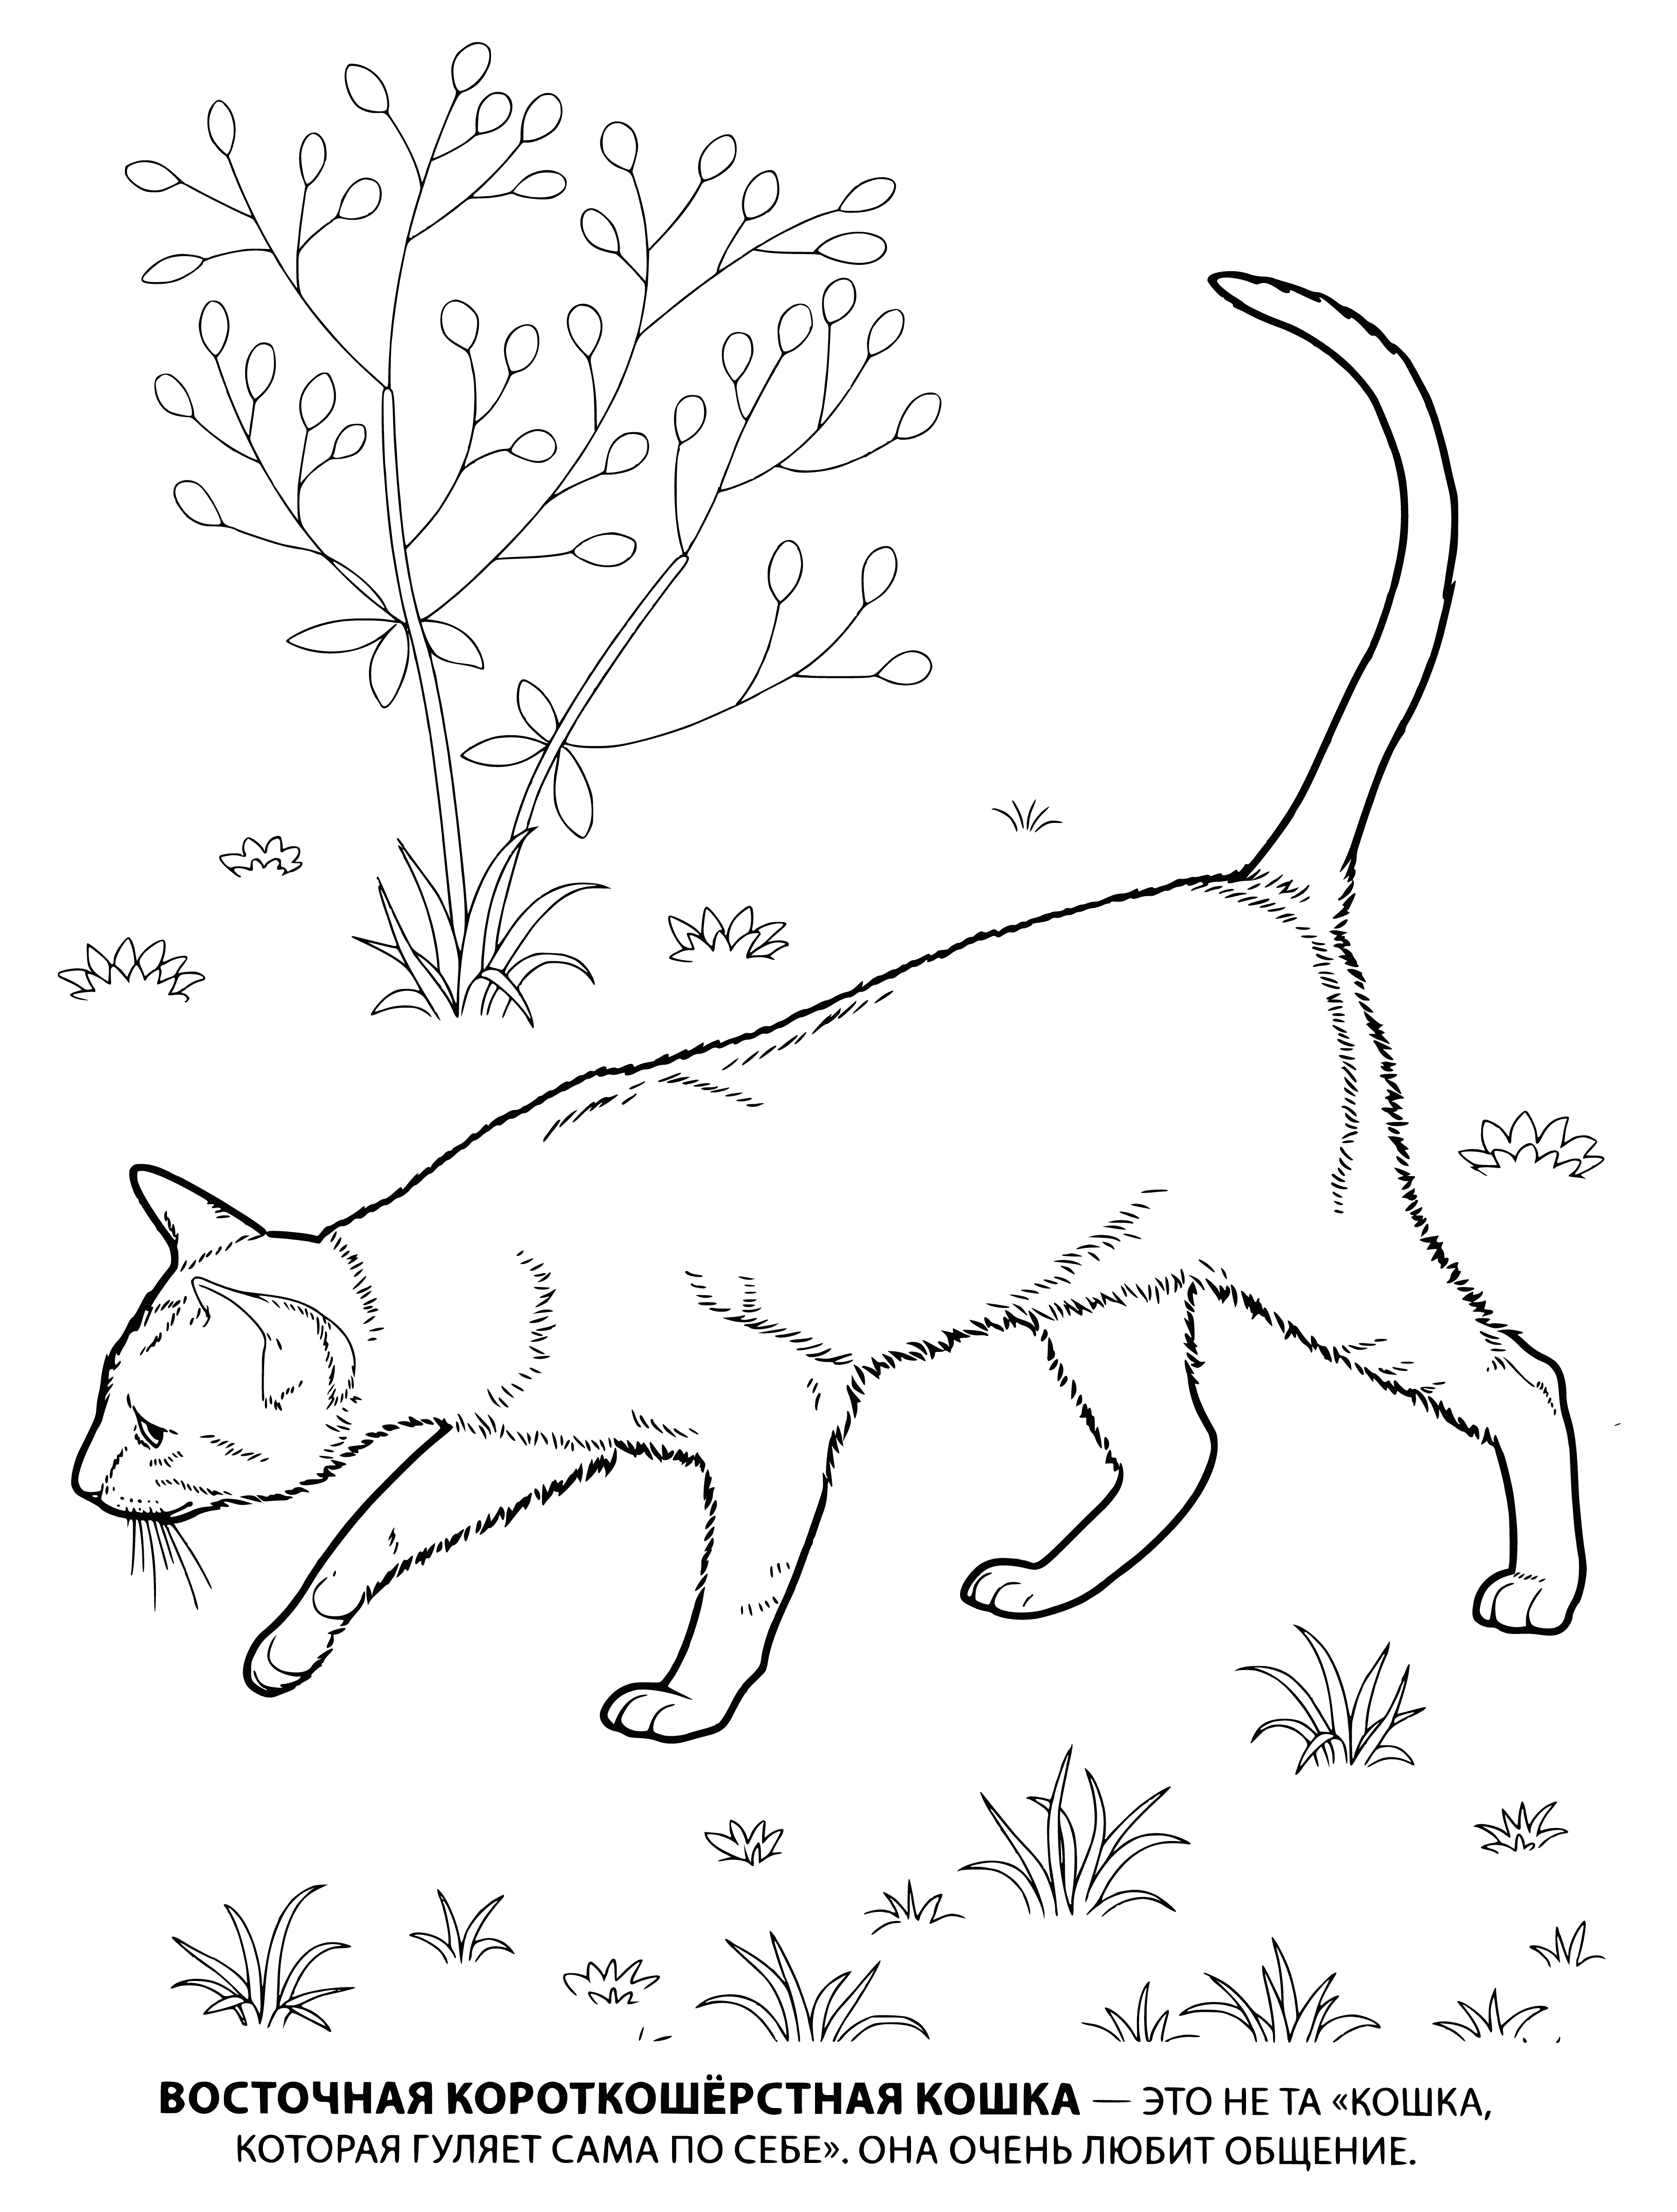 coloring page: Medium-sized cat with short, brown and black fur, round head, green eyes, black ears with white tips, and a long, black tail.